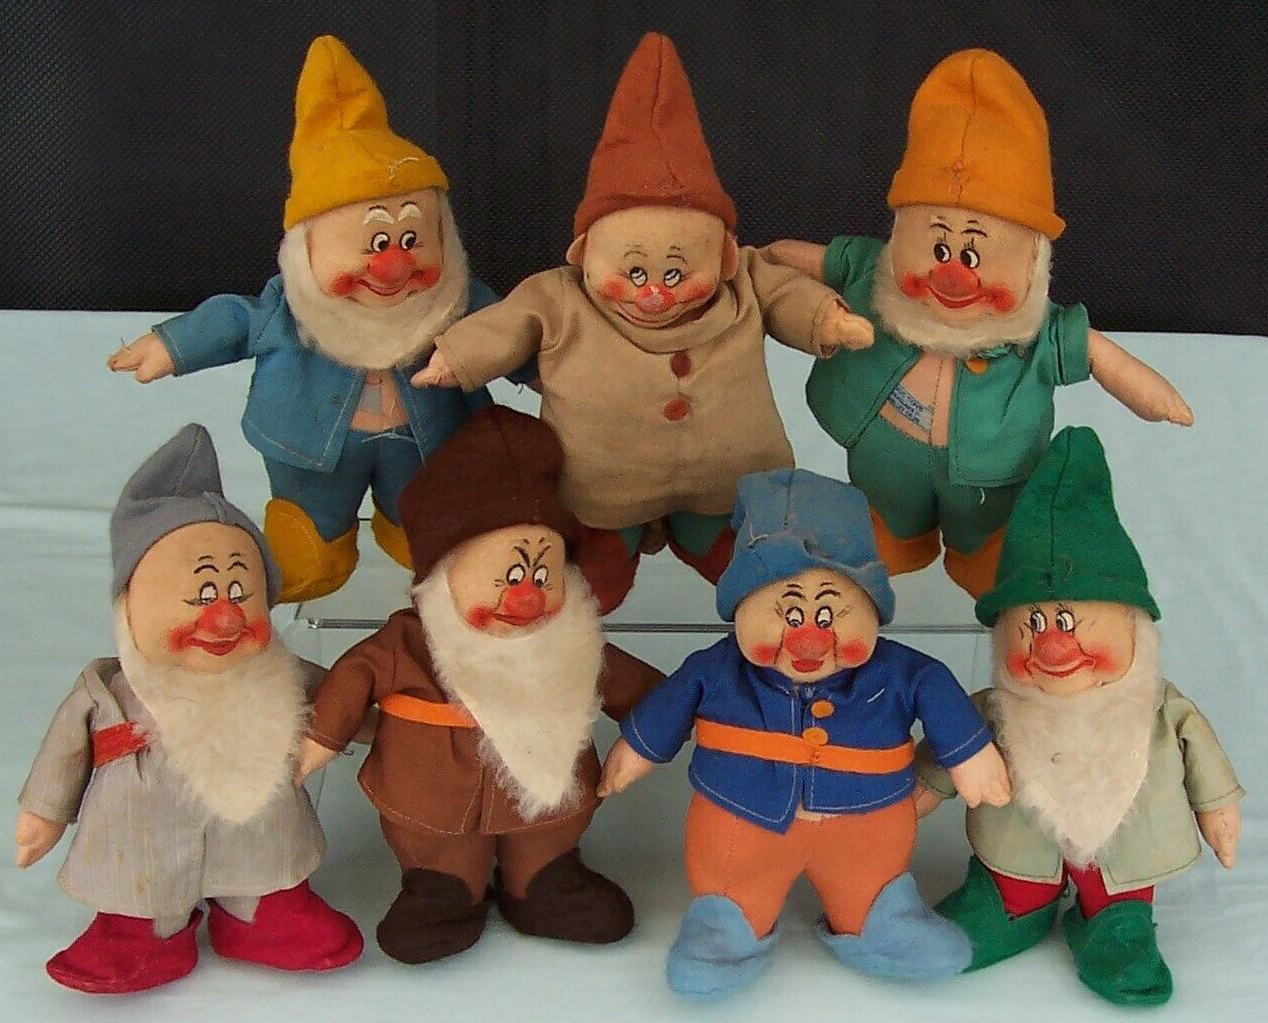 Vintage Chad Valley The Seven Dwarfs 7 Set England c1930's from Snow White.png